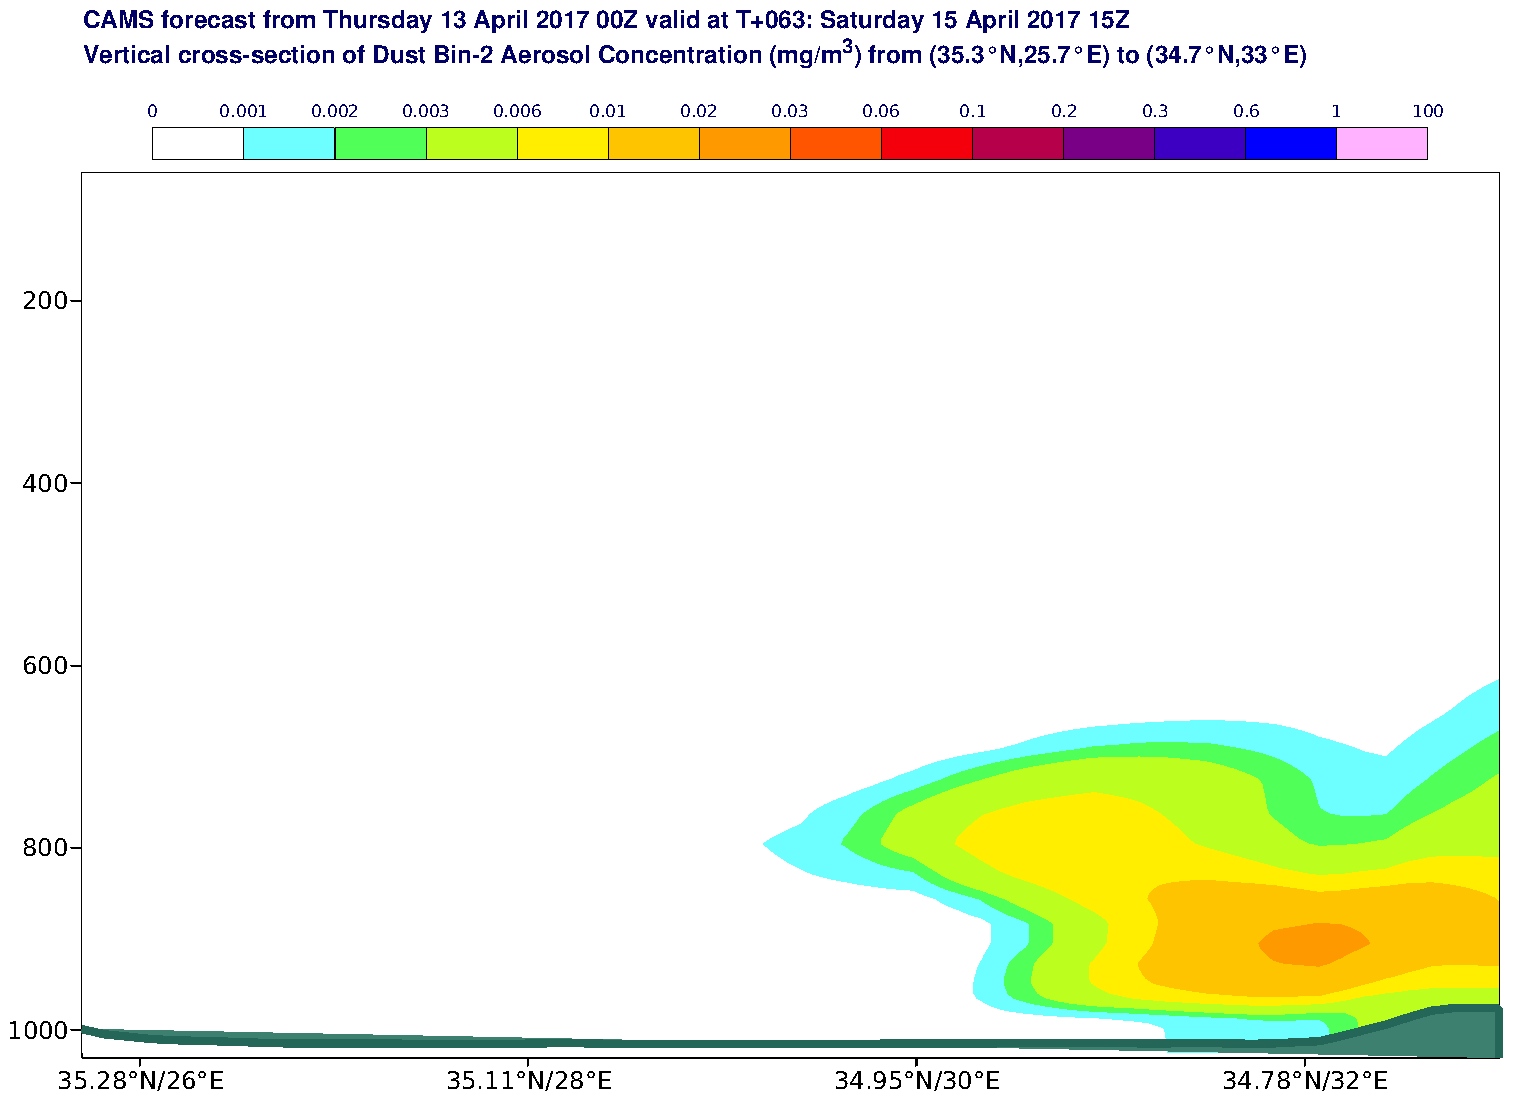 Vertical cross-section of Dust Bin-2 Aerosol Concentration (mg/m3) valid at T63 - 2017-04-15 15:00